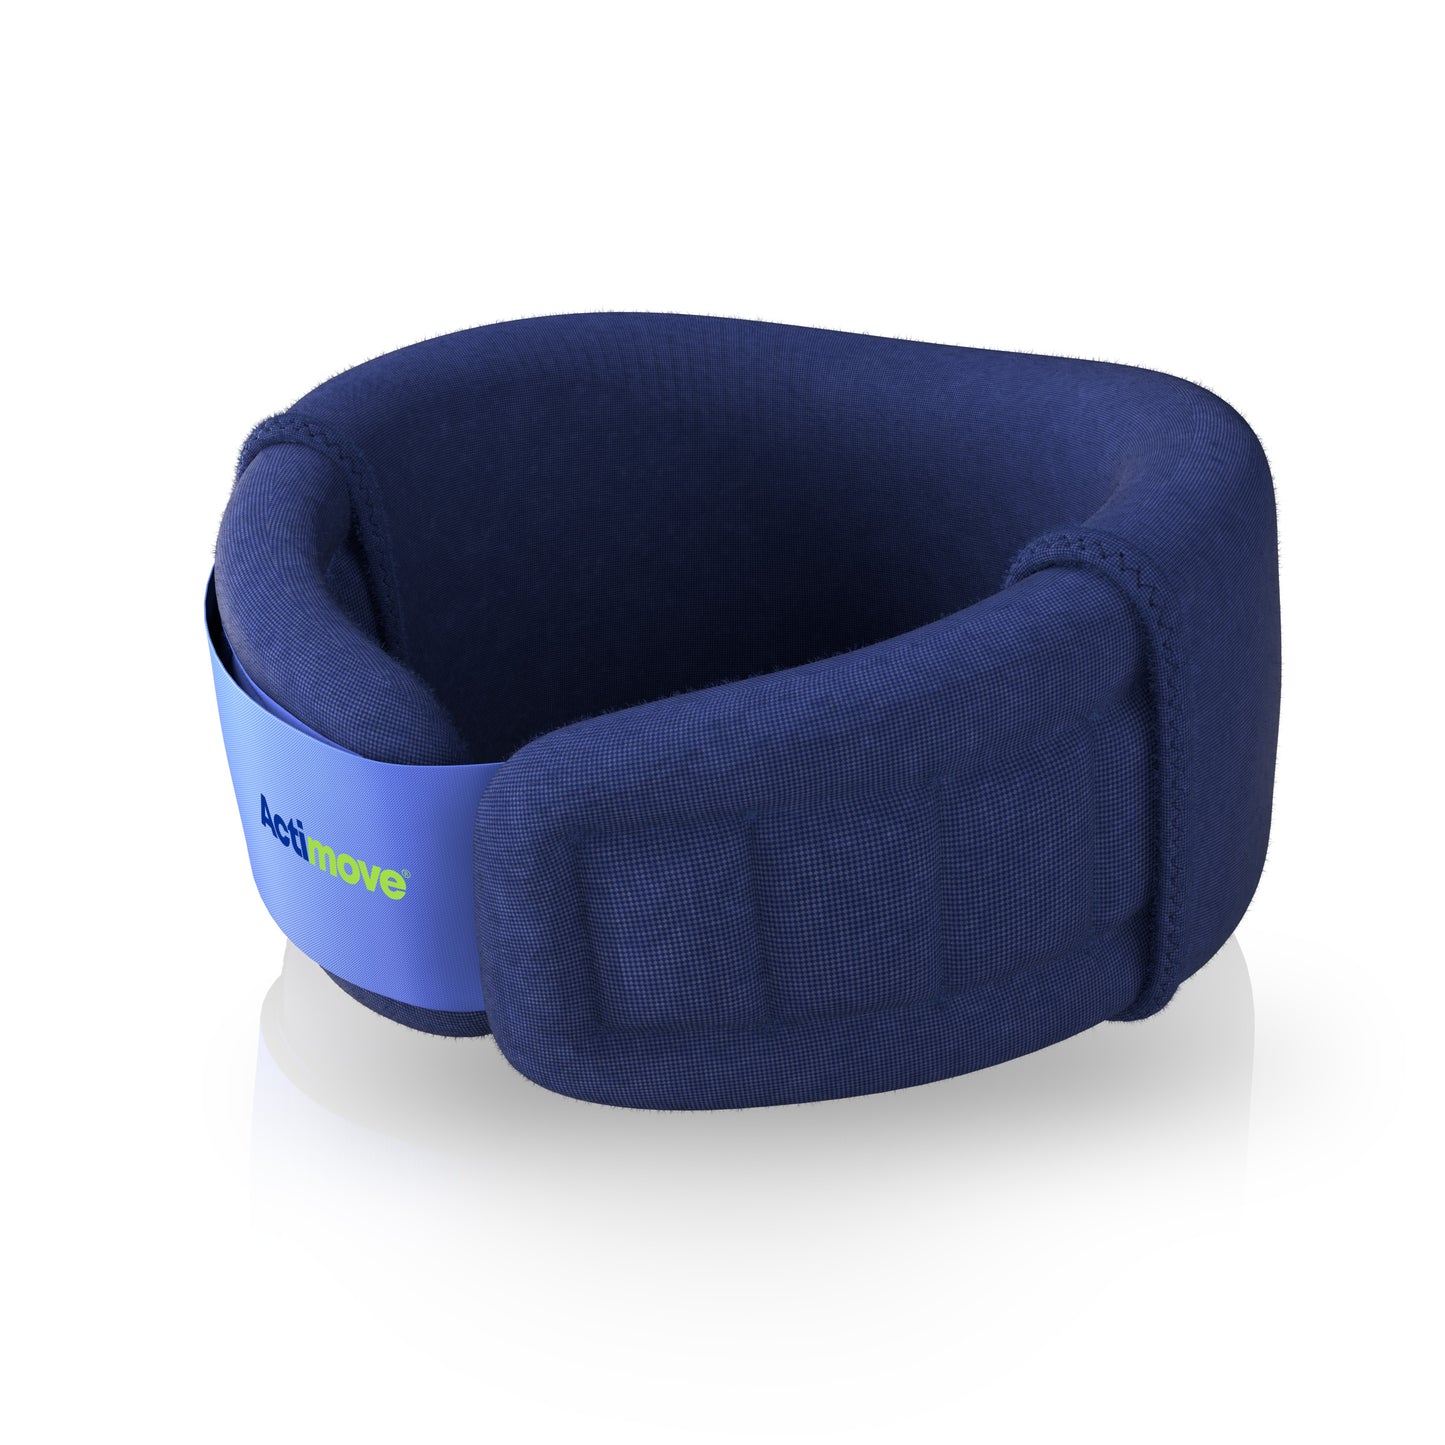 Jobst Actimove Professional Line Cervical Comfort Collar Product